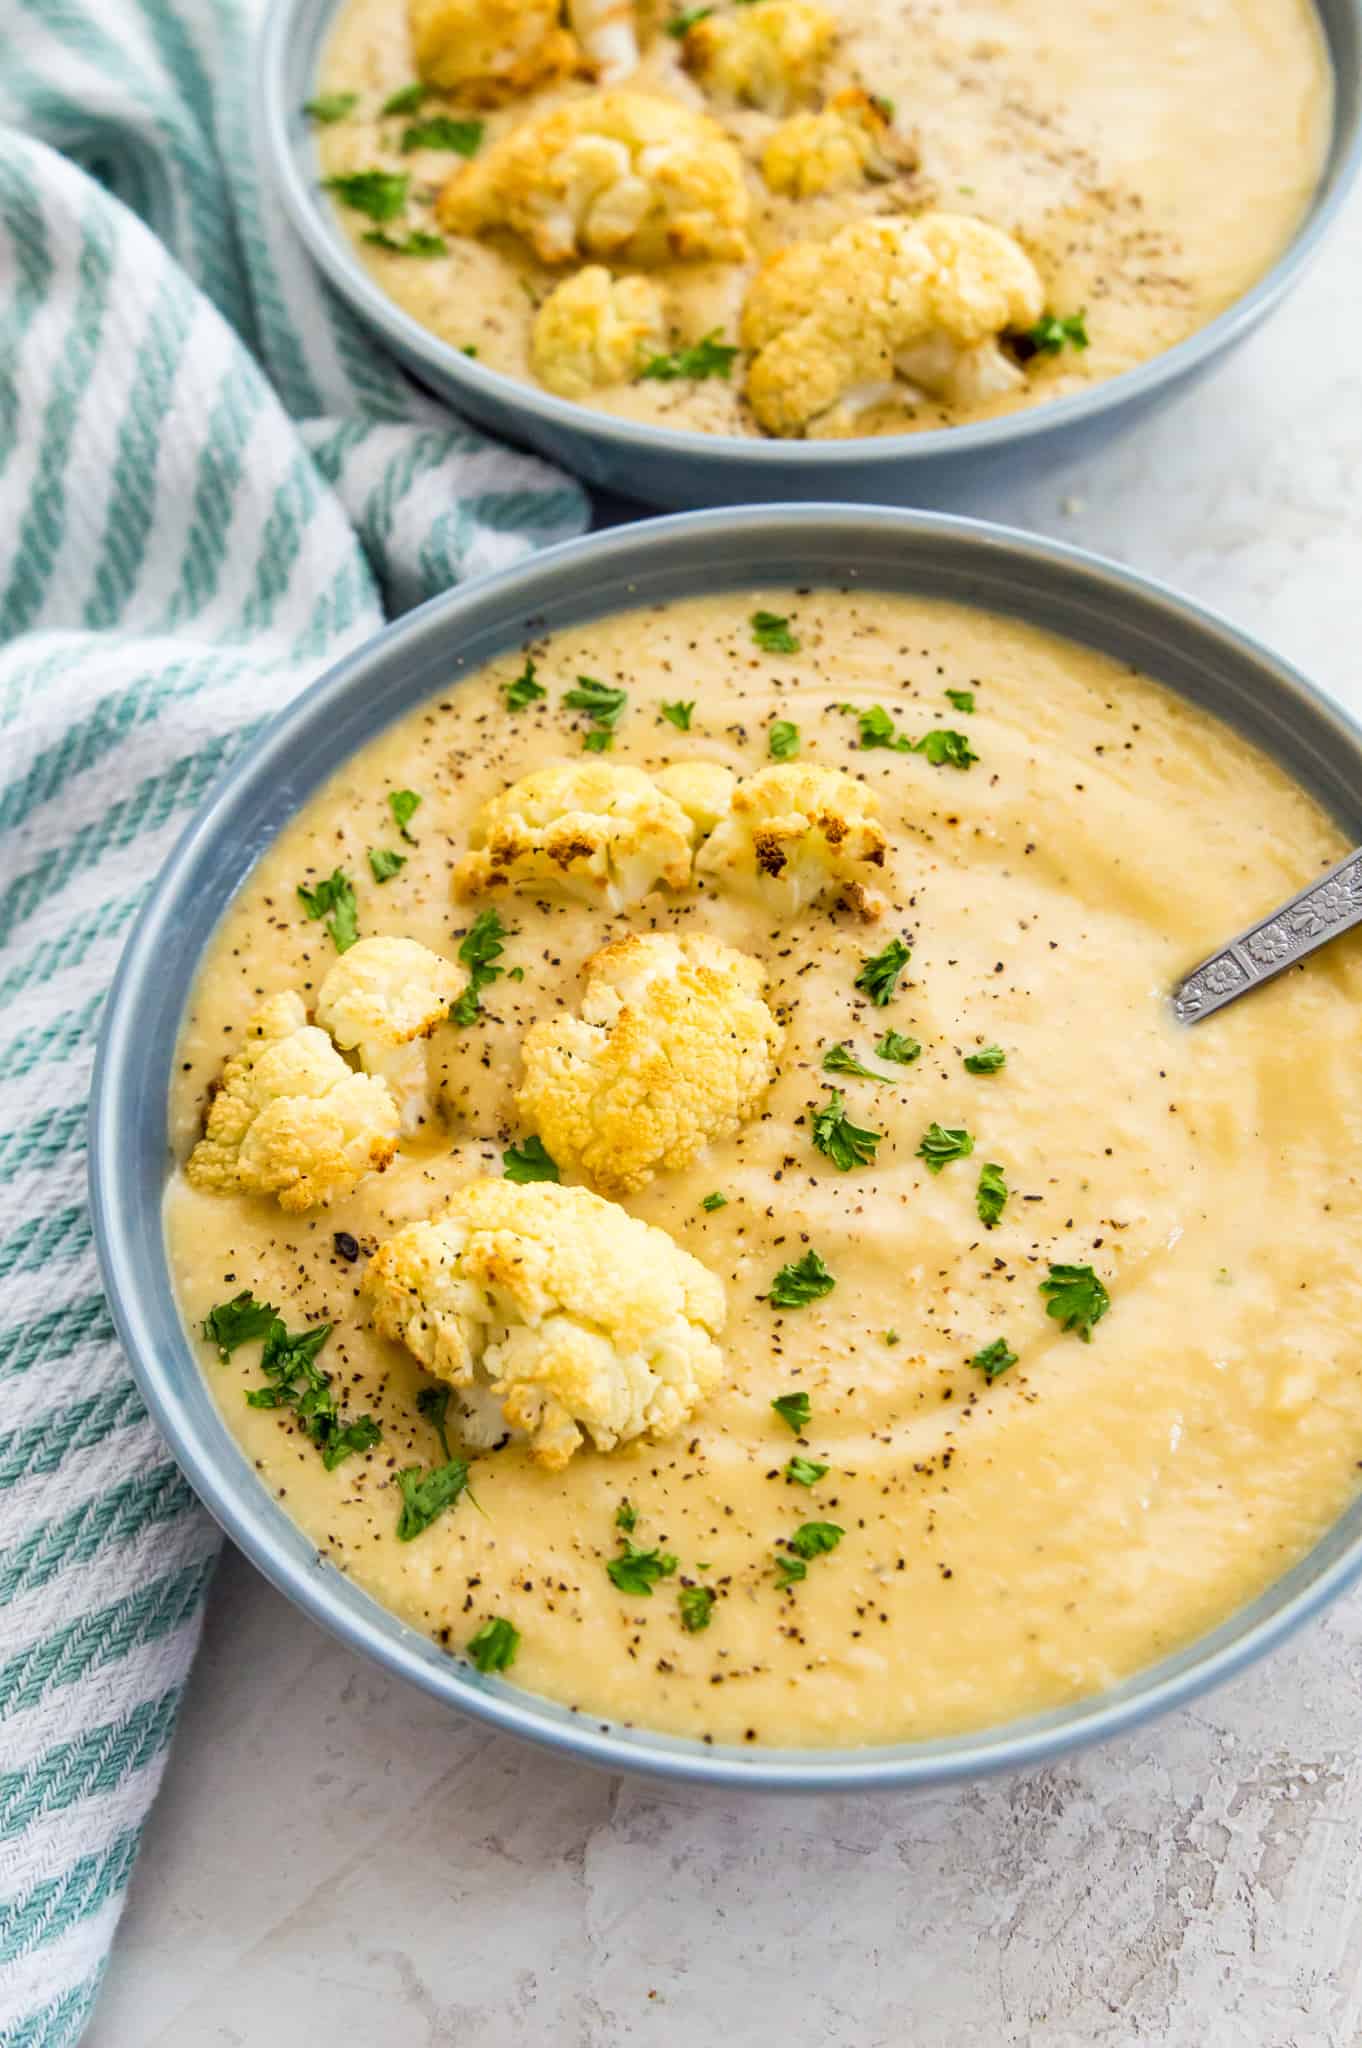 Bowls of creamy cauliflower soup topped with roasted cauliflower, black pepper and fresh parsley.